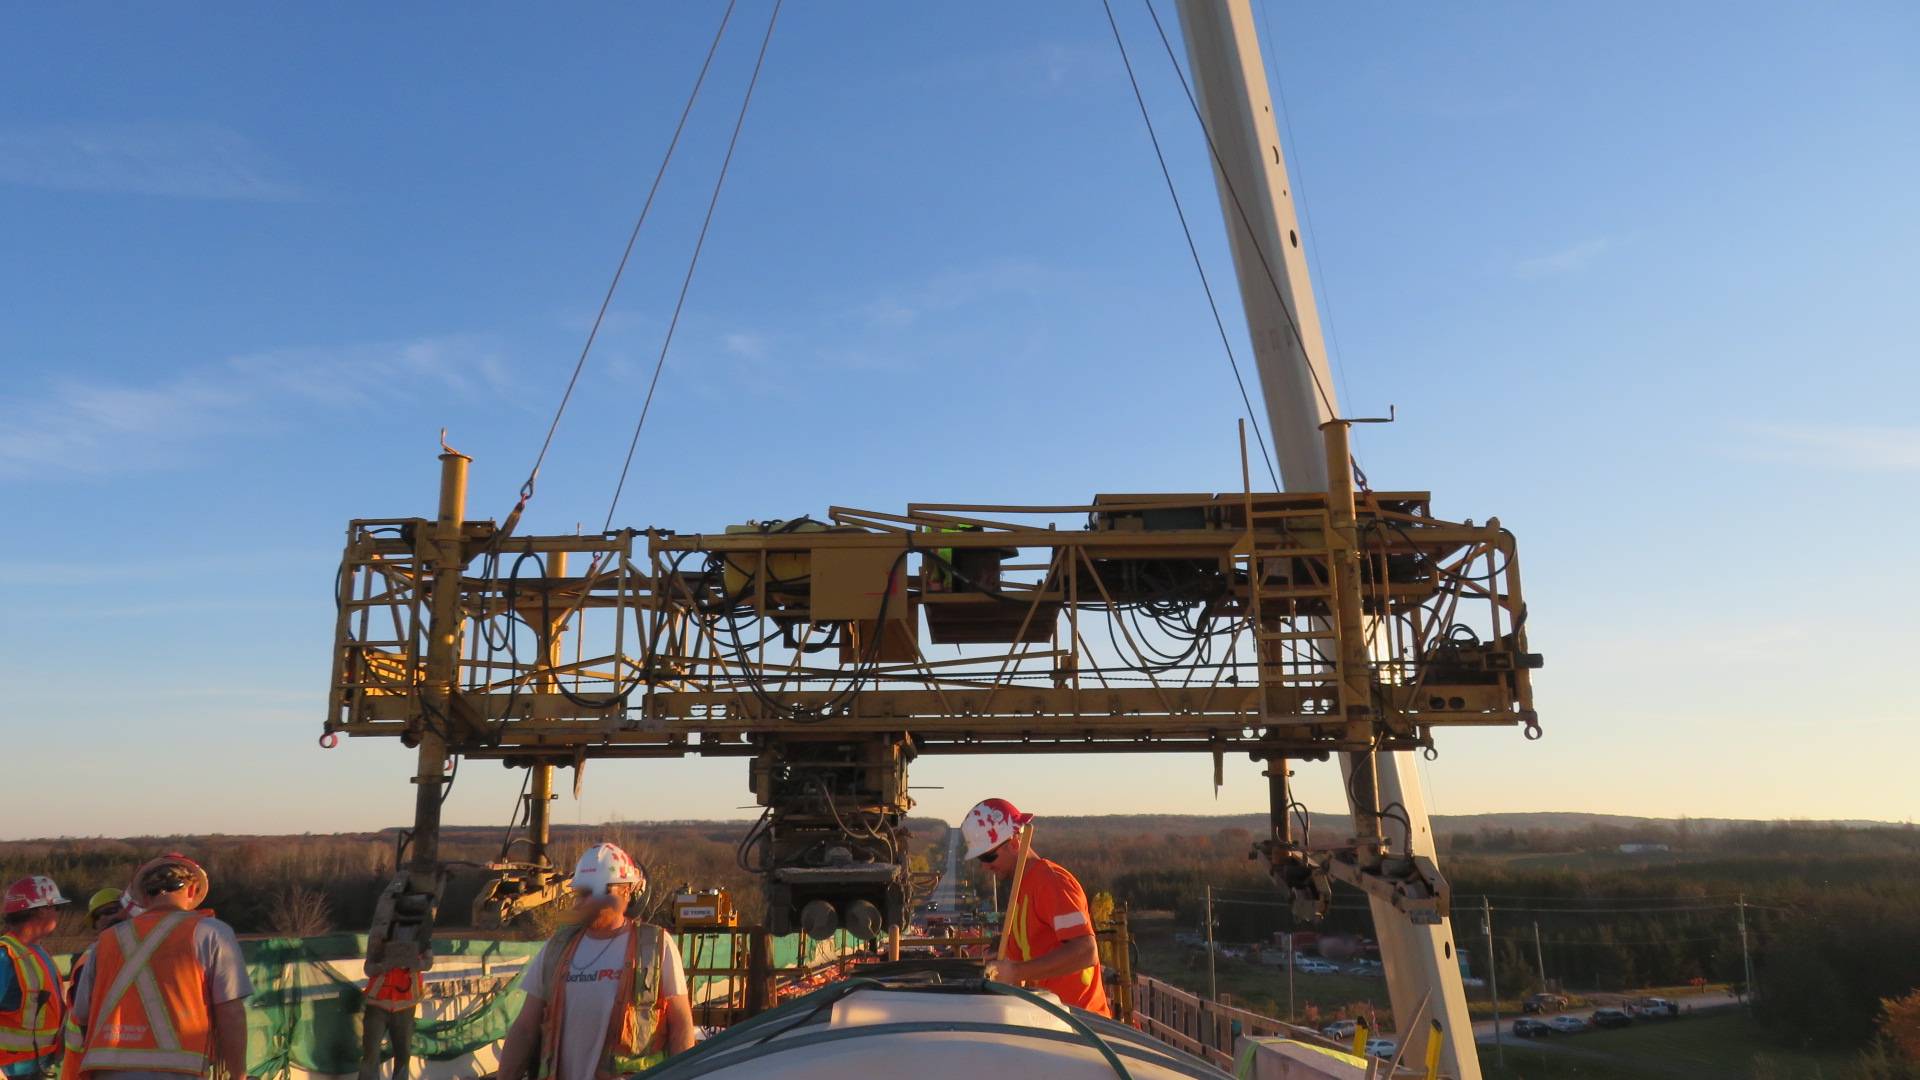 160-ton crane starting to lift the concrete finisher from the bridge deck